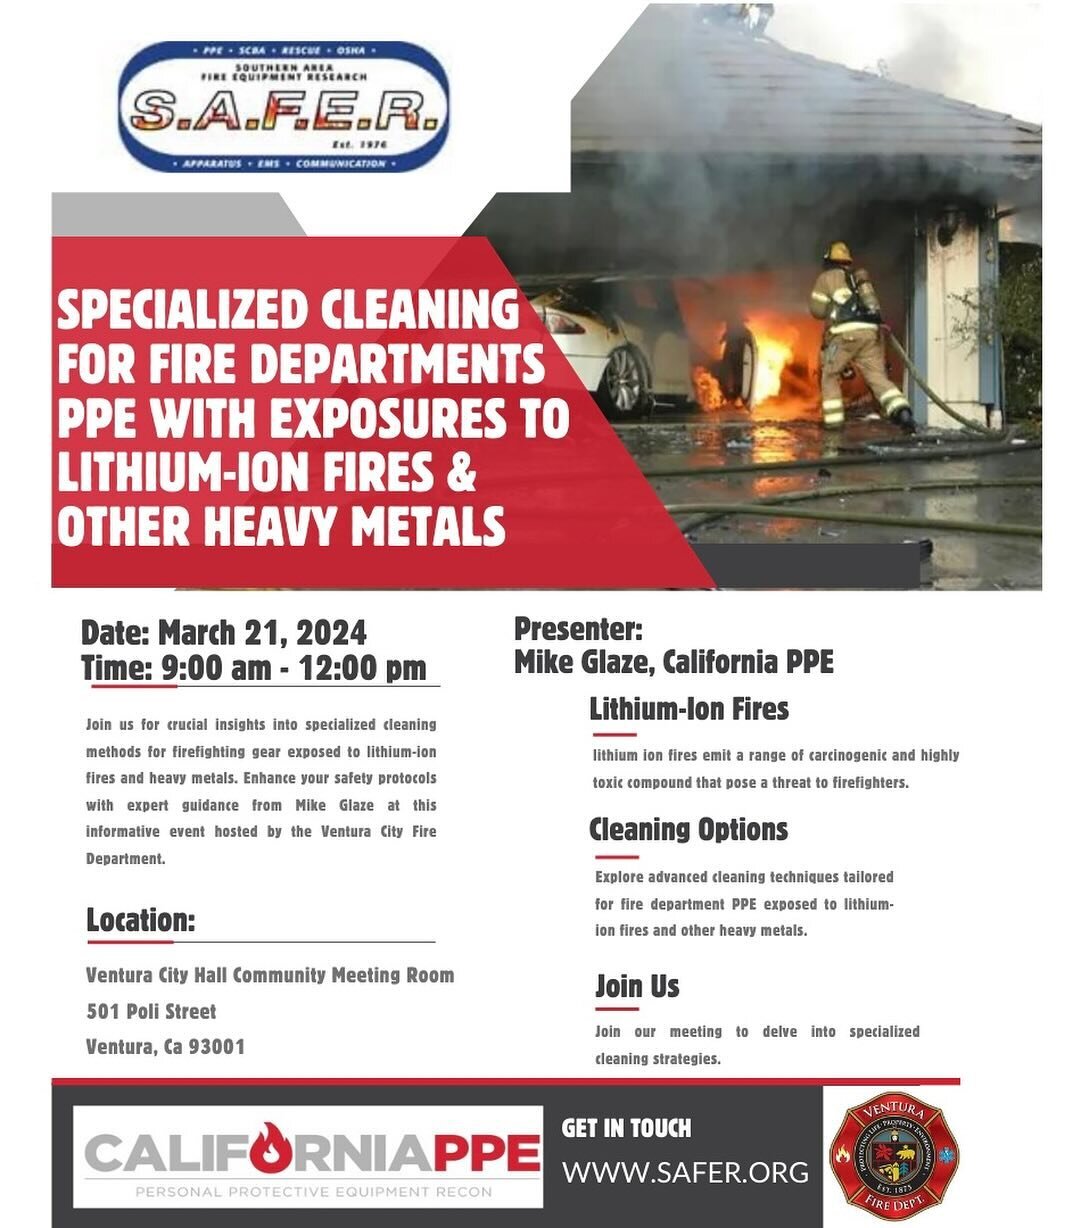 Don&rsquo;t miss out on crucial insights into specialized cleaning methods for firefighting gear exposed to lithium-ion fires and heavy metals! Presenter Mike Glaze from California PPE will guide us through cleaning options tailored for PPE exposed t